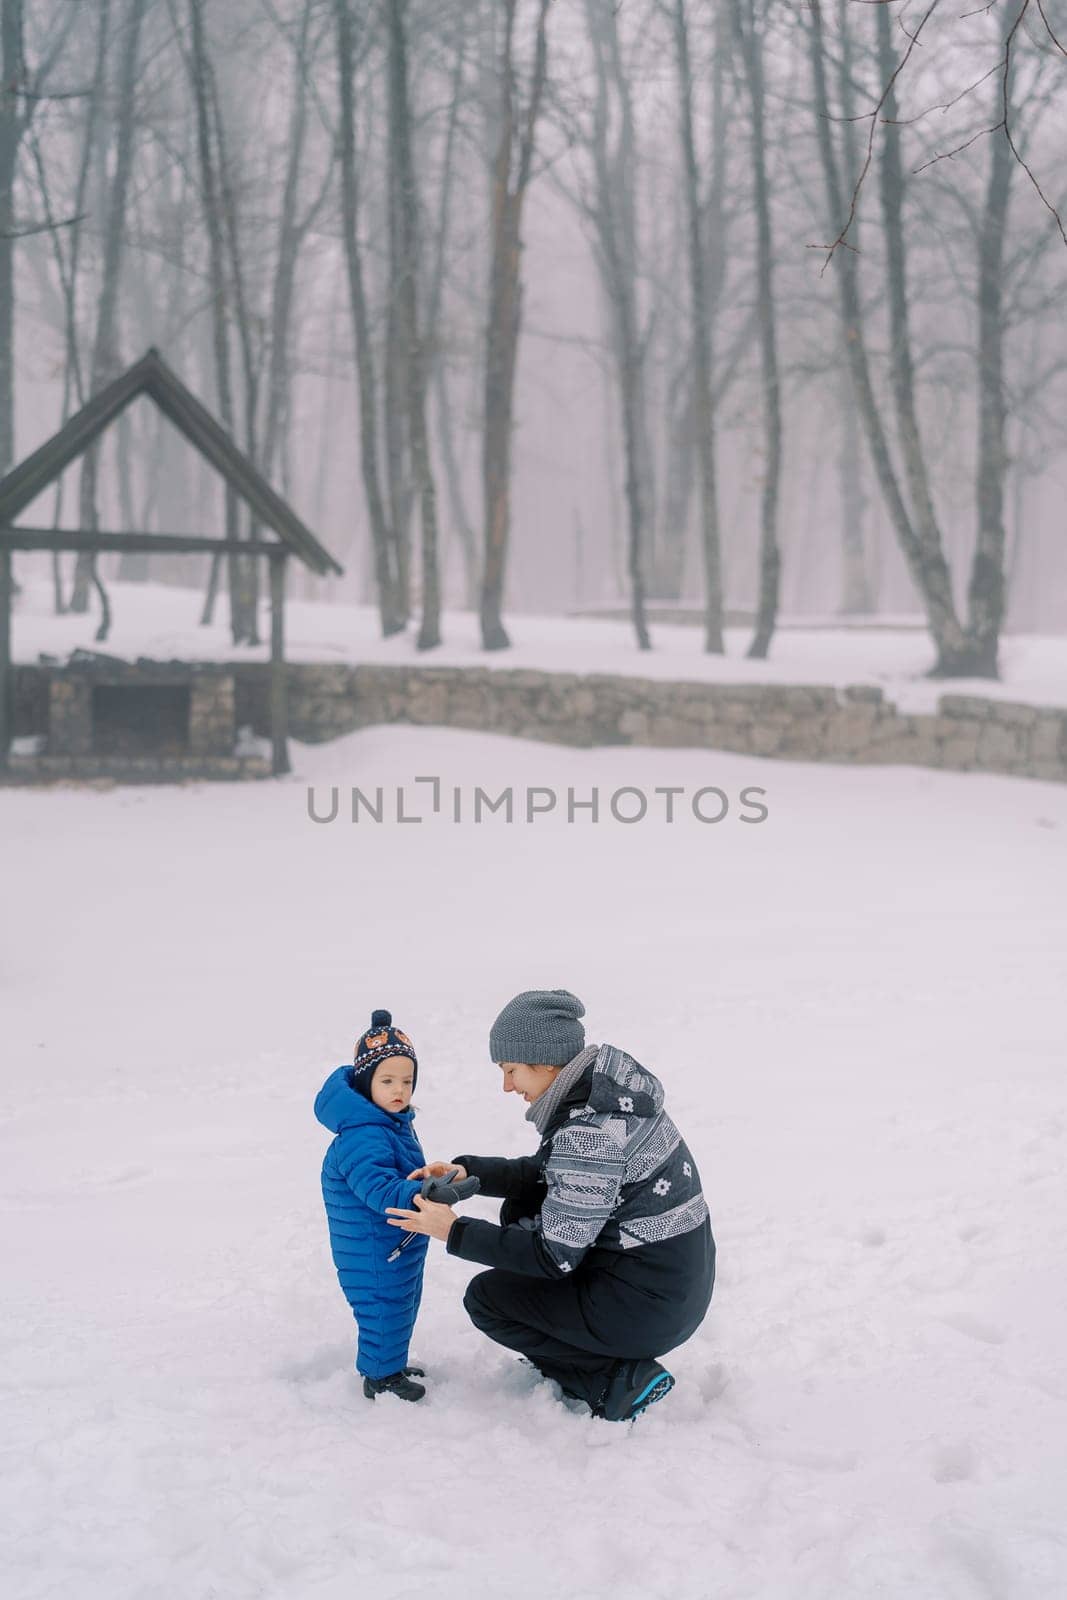 Mom puts on mittens to a little girl squatting in a snowy forest. High quality photo